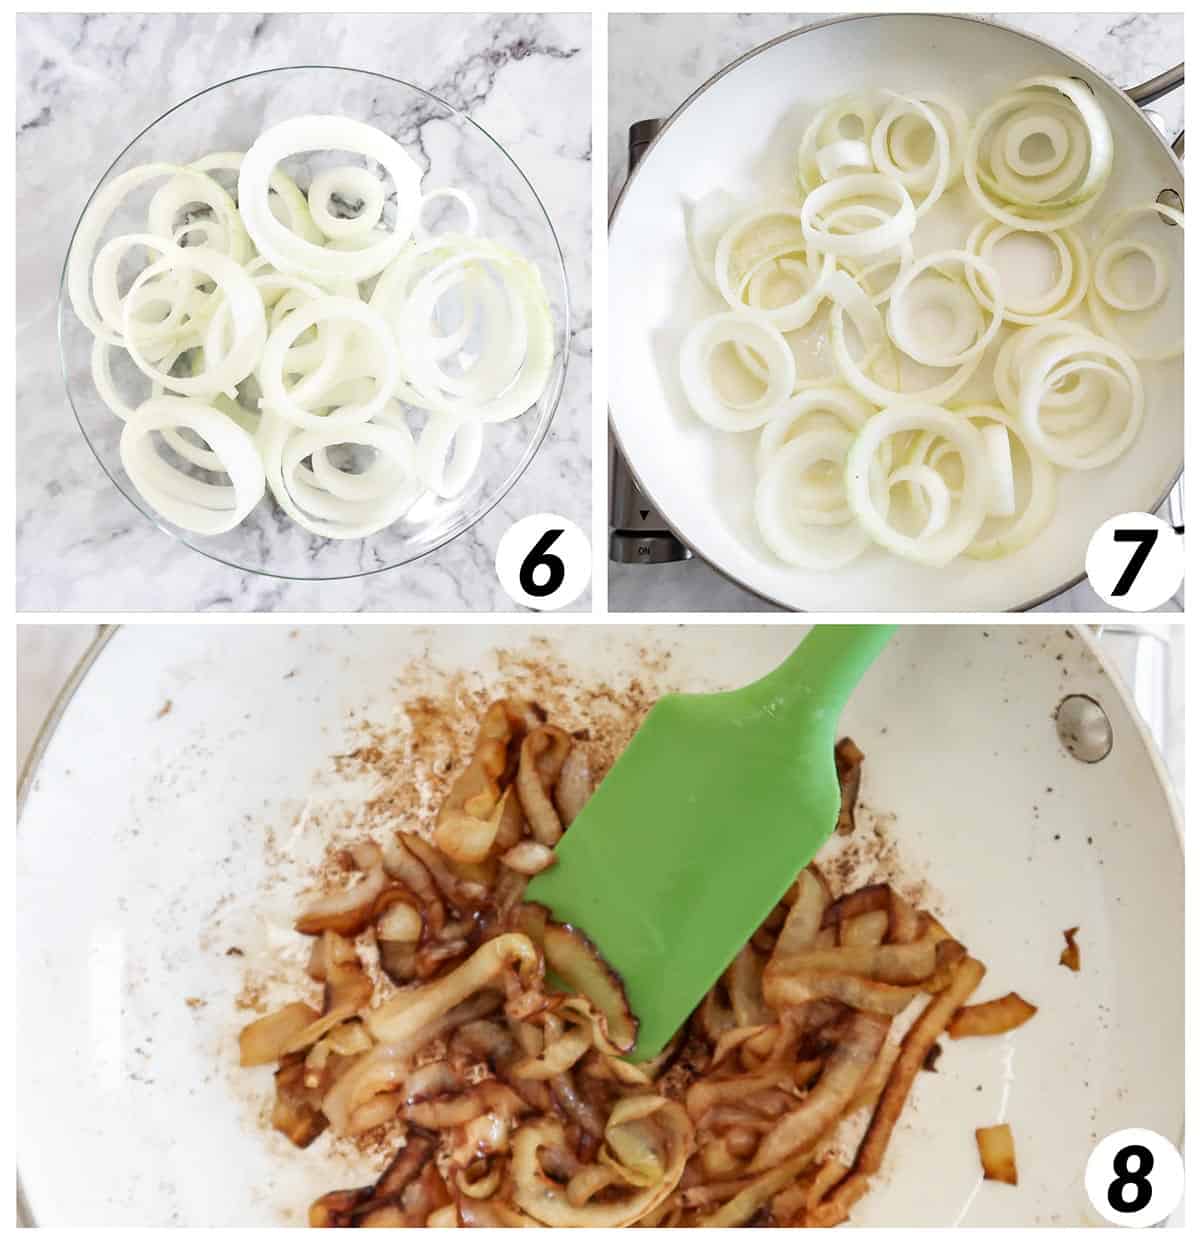 Three panel collage of process steps 6-8 - prepping and caramelizing onions in a skillet.